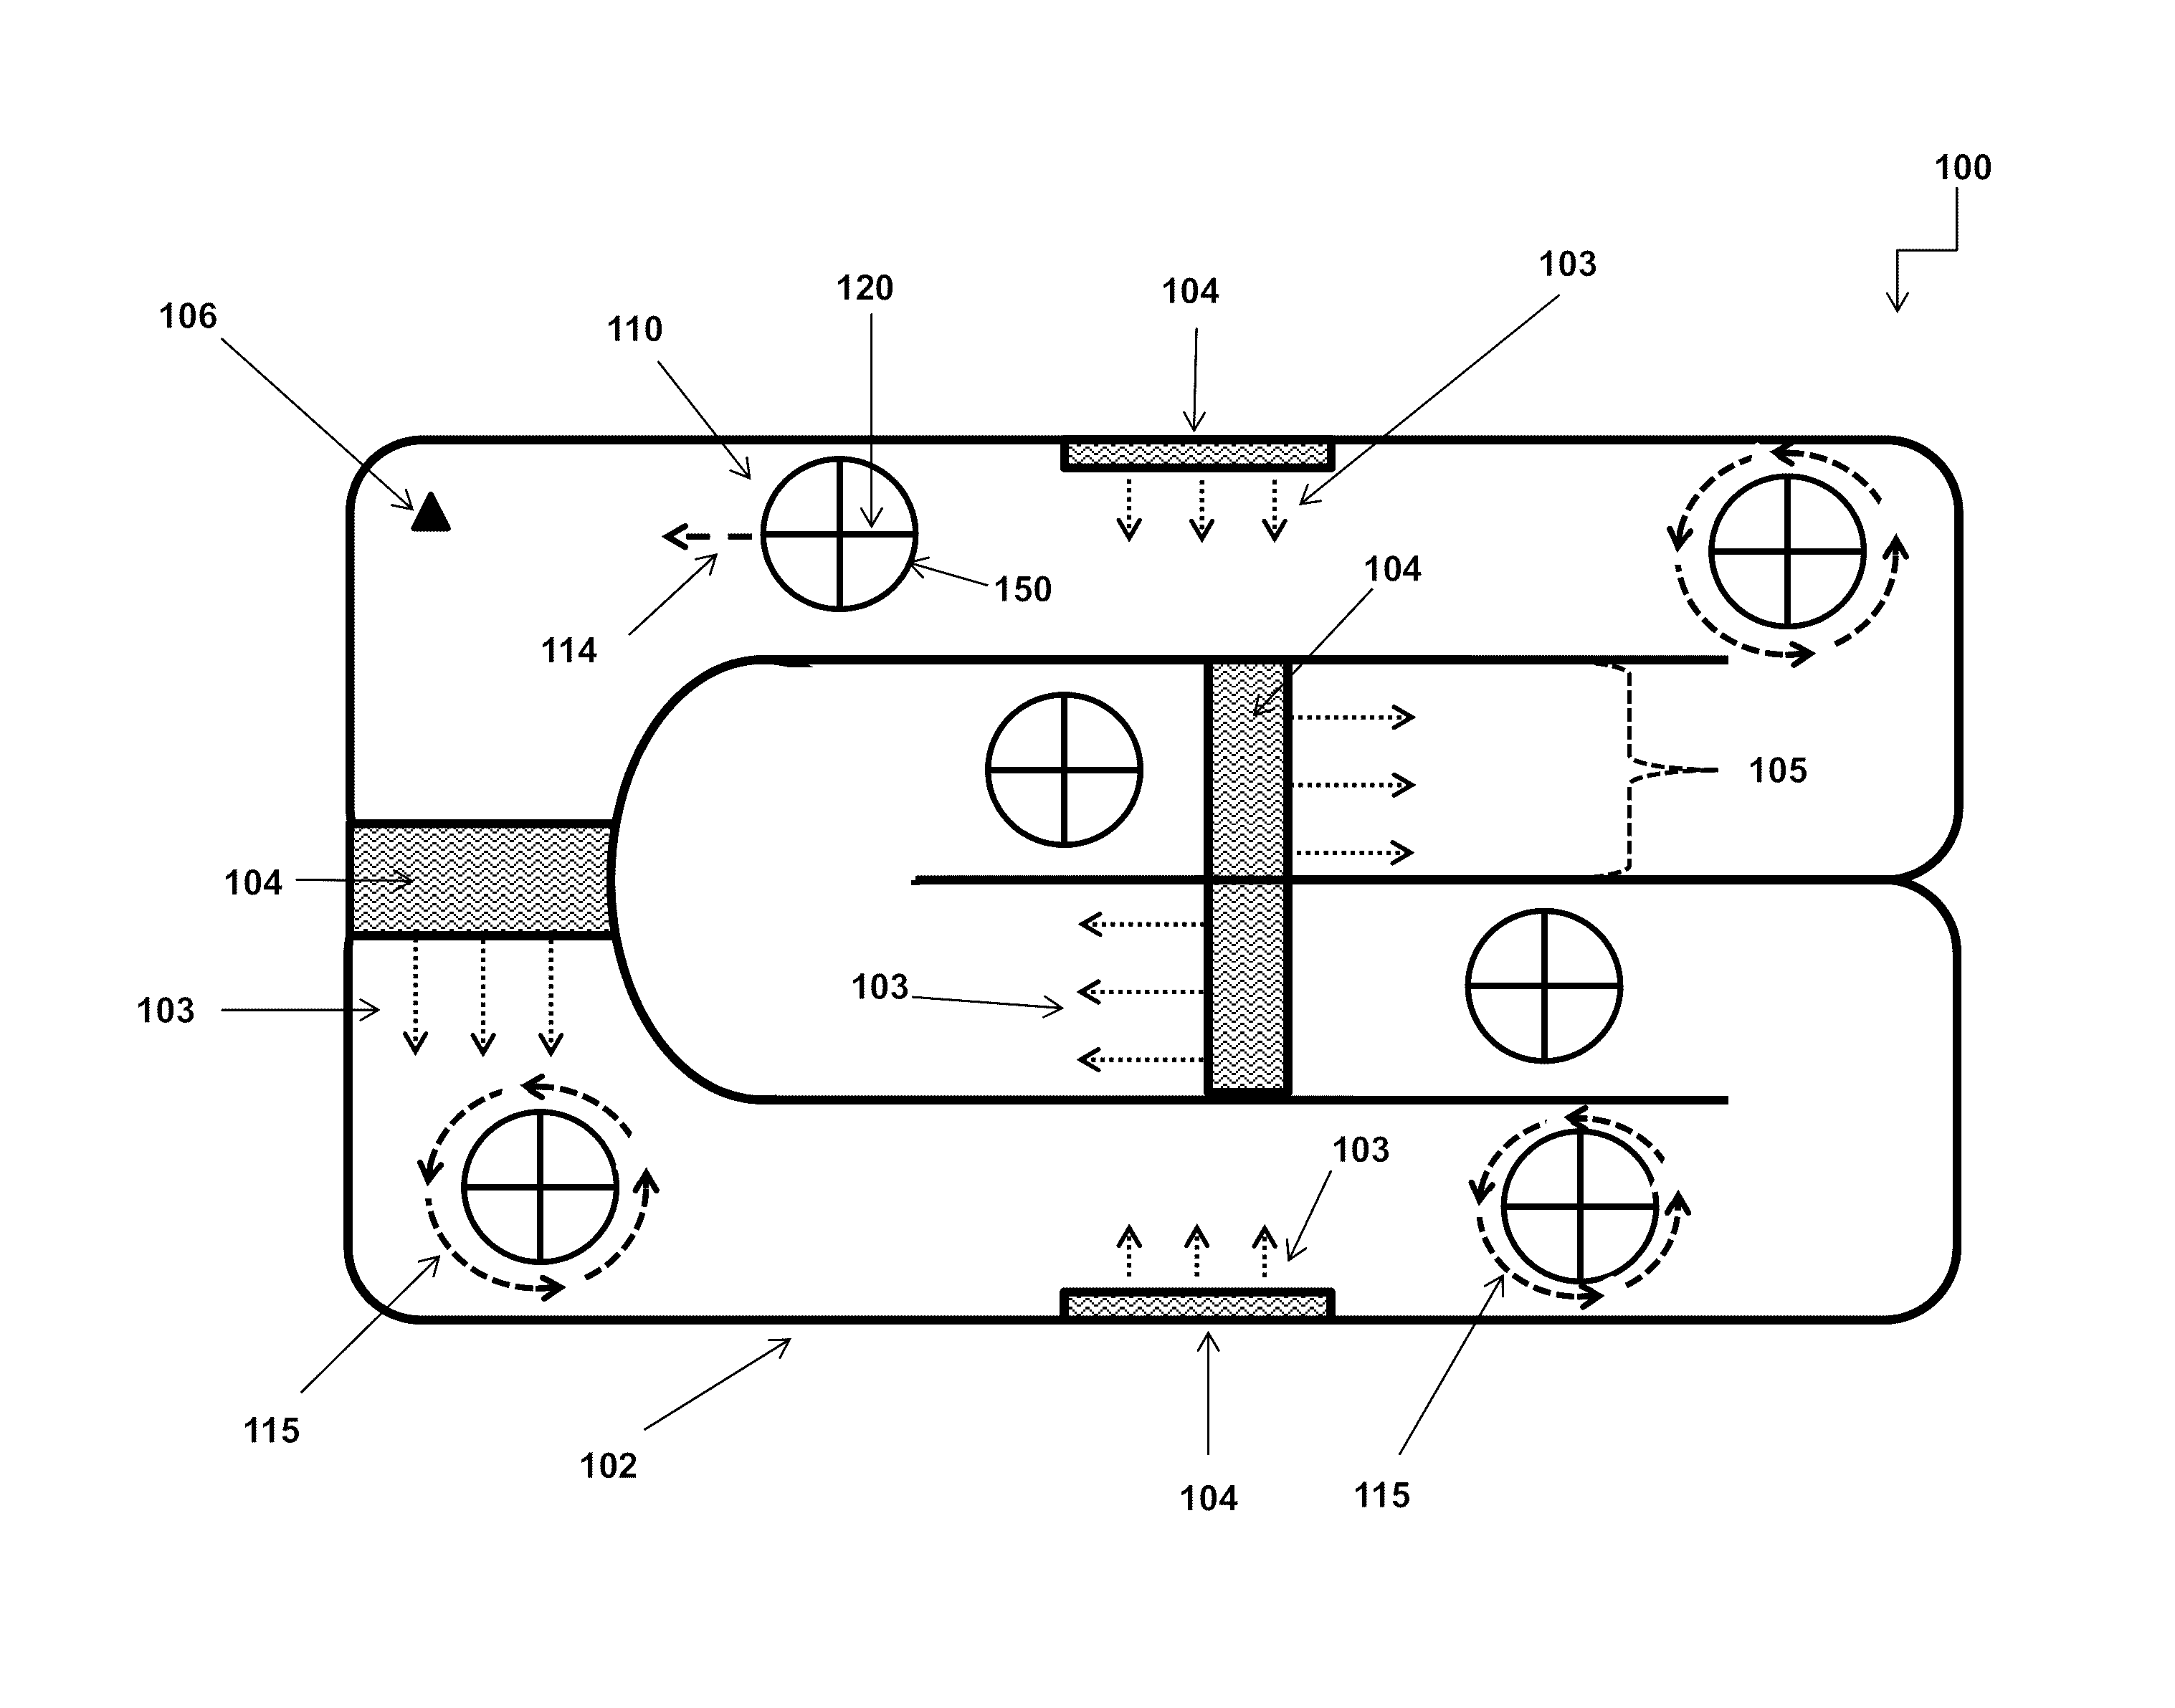 Apparatuses, methods, and systems for cultivating a microcrop involving a floating coupling device